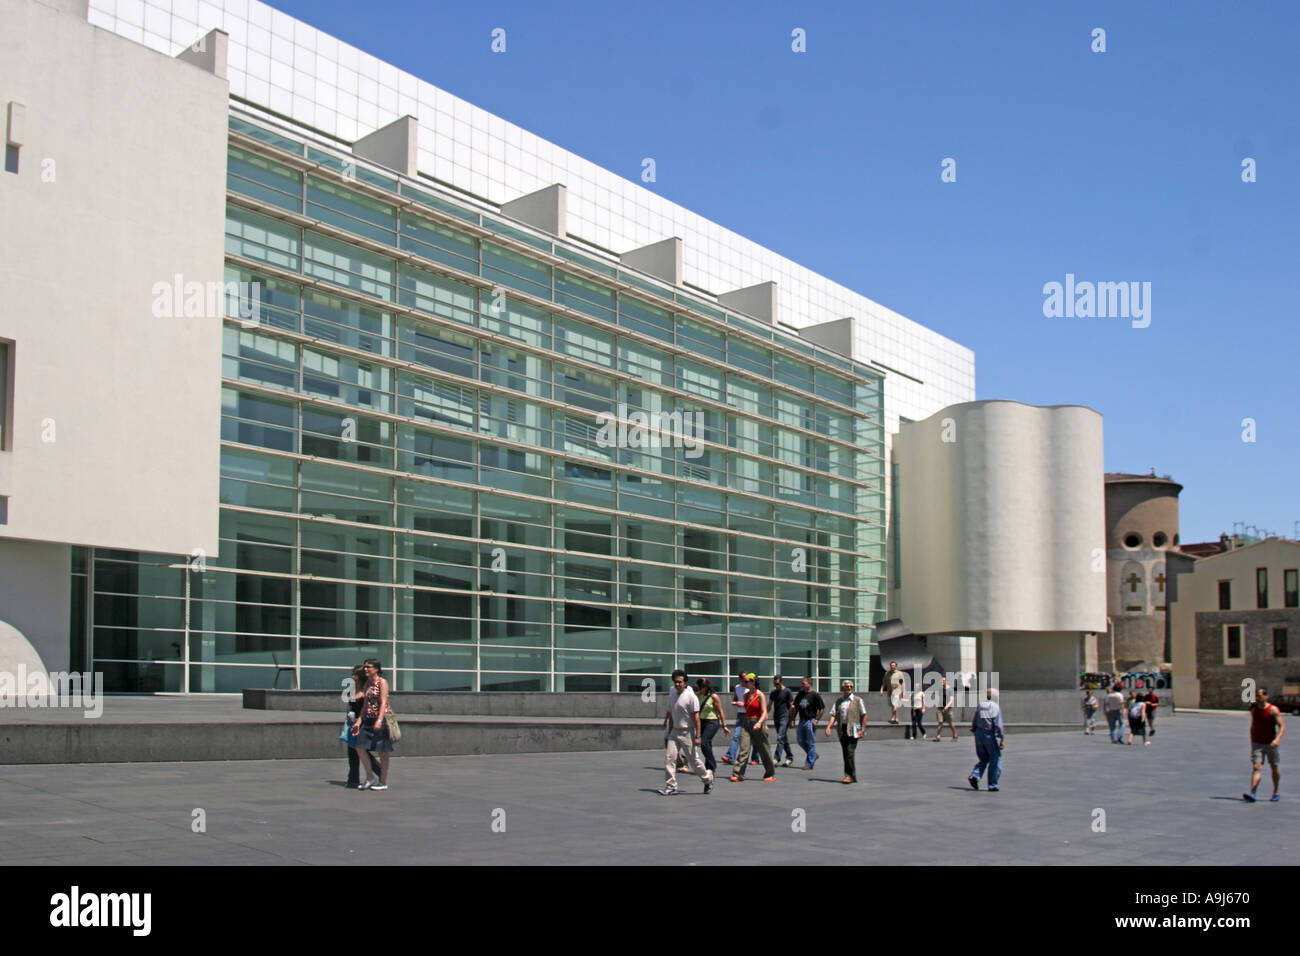 Barcelona museum of contemporary art modern architecture by Richard Meier Stock Photo